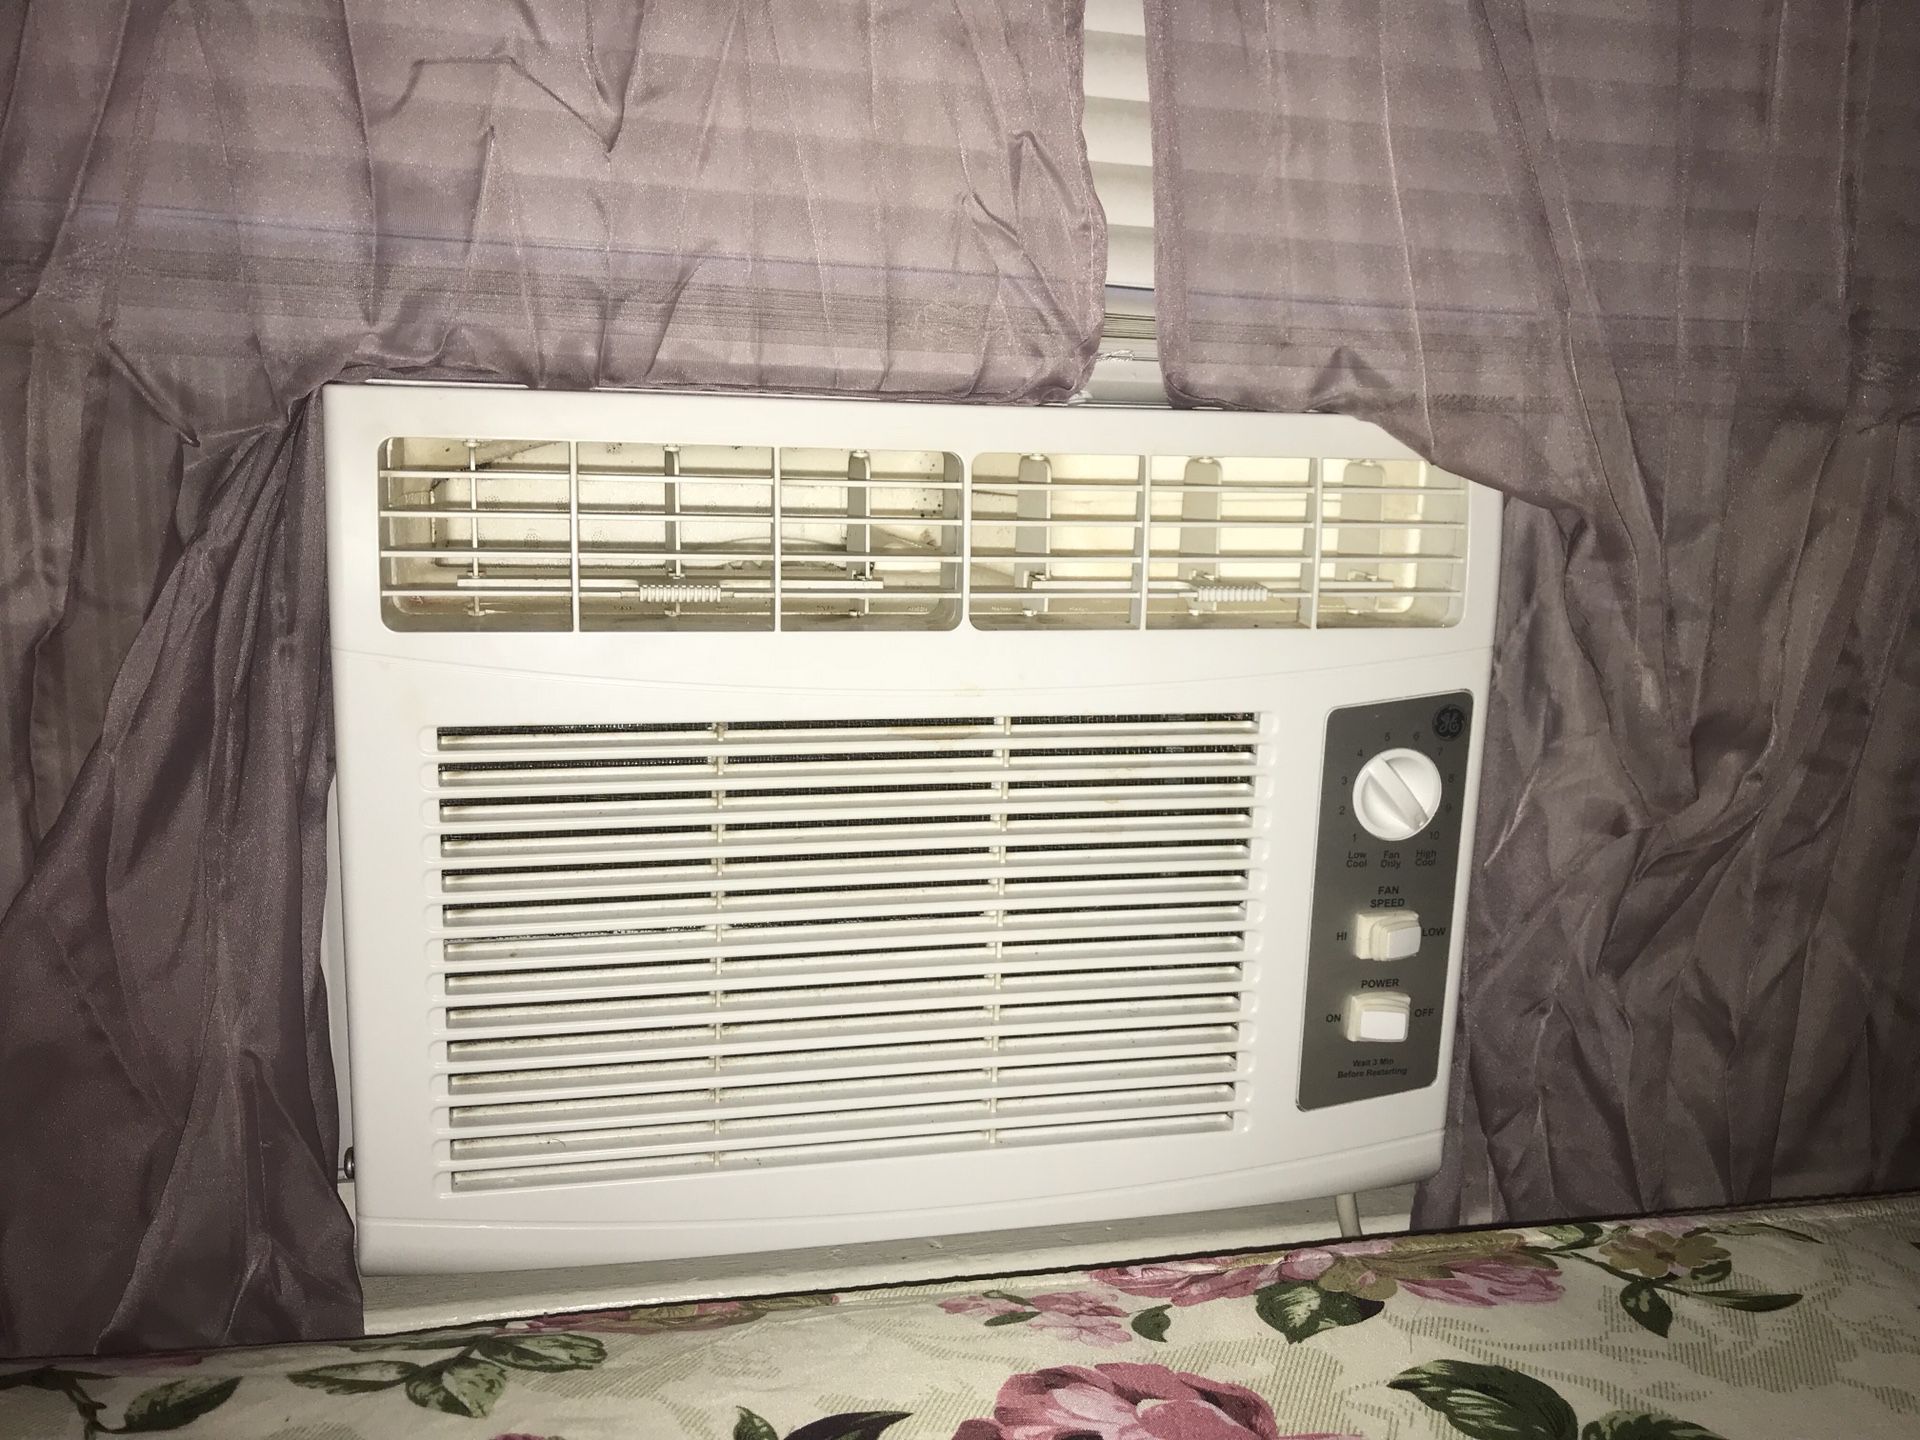 3 Air conditioners